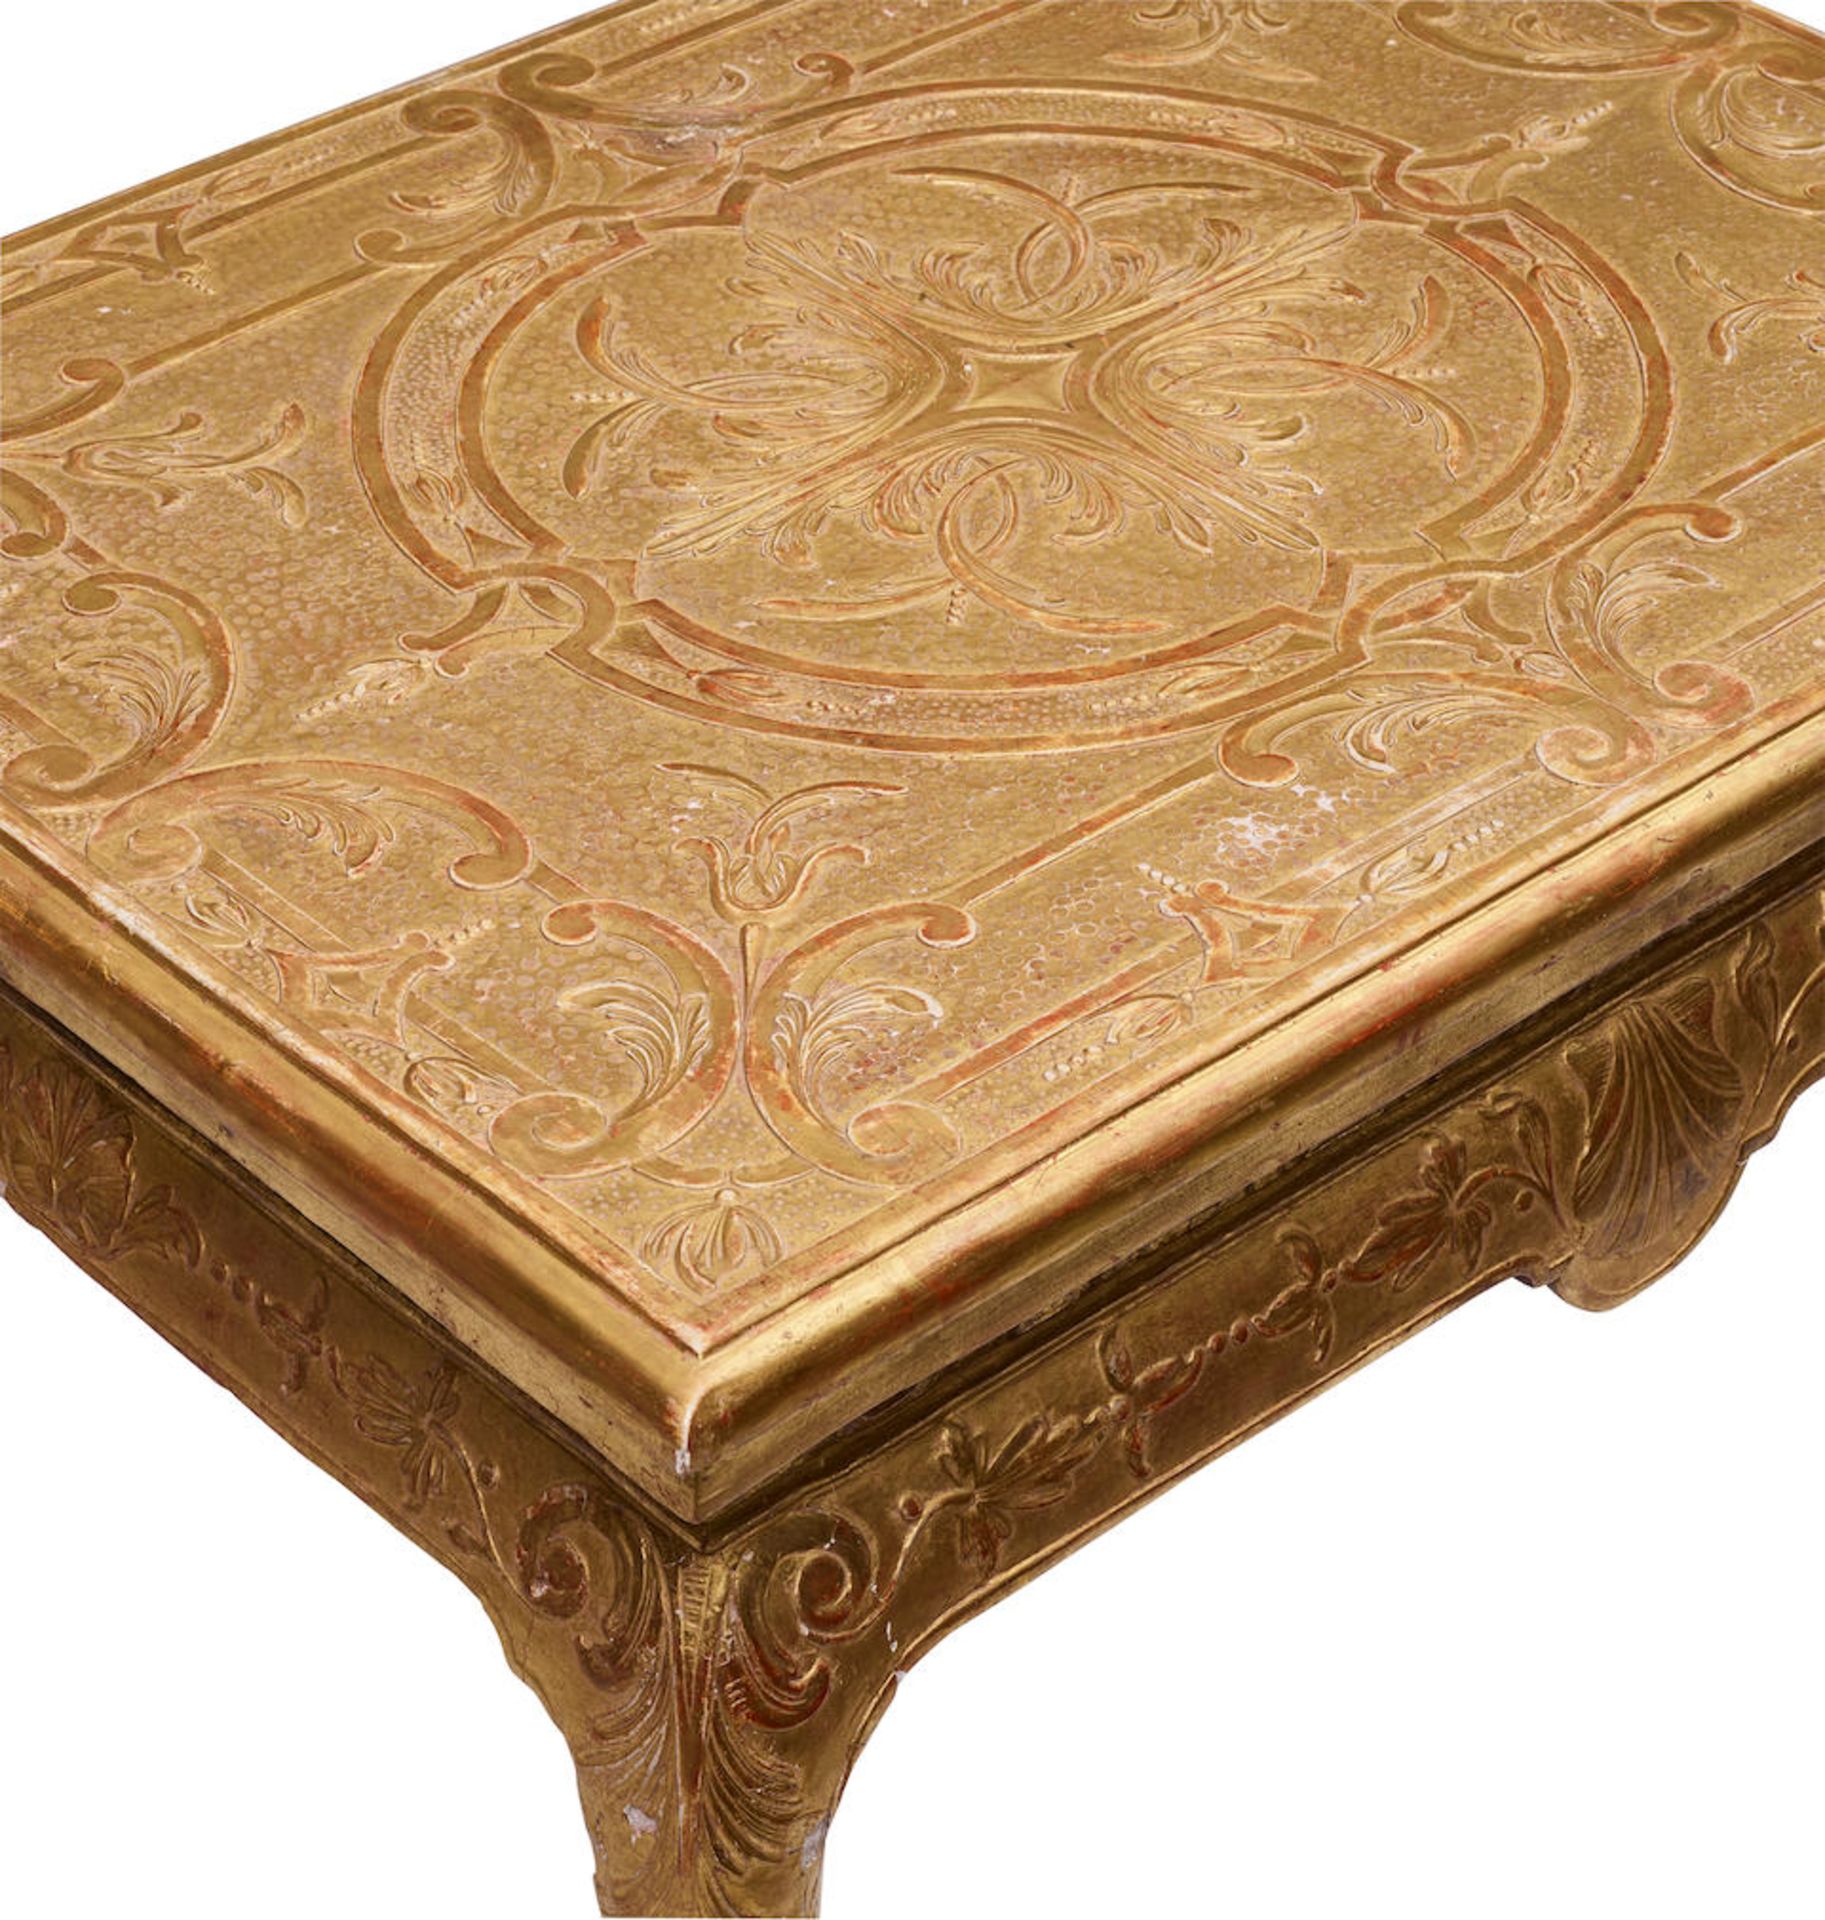 A GEORGE II STYLE CARVED AND GILT GESSO SIDE TABLE - Image 2 of 2